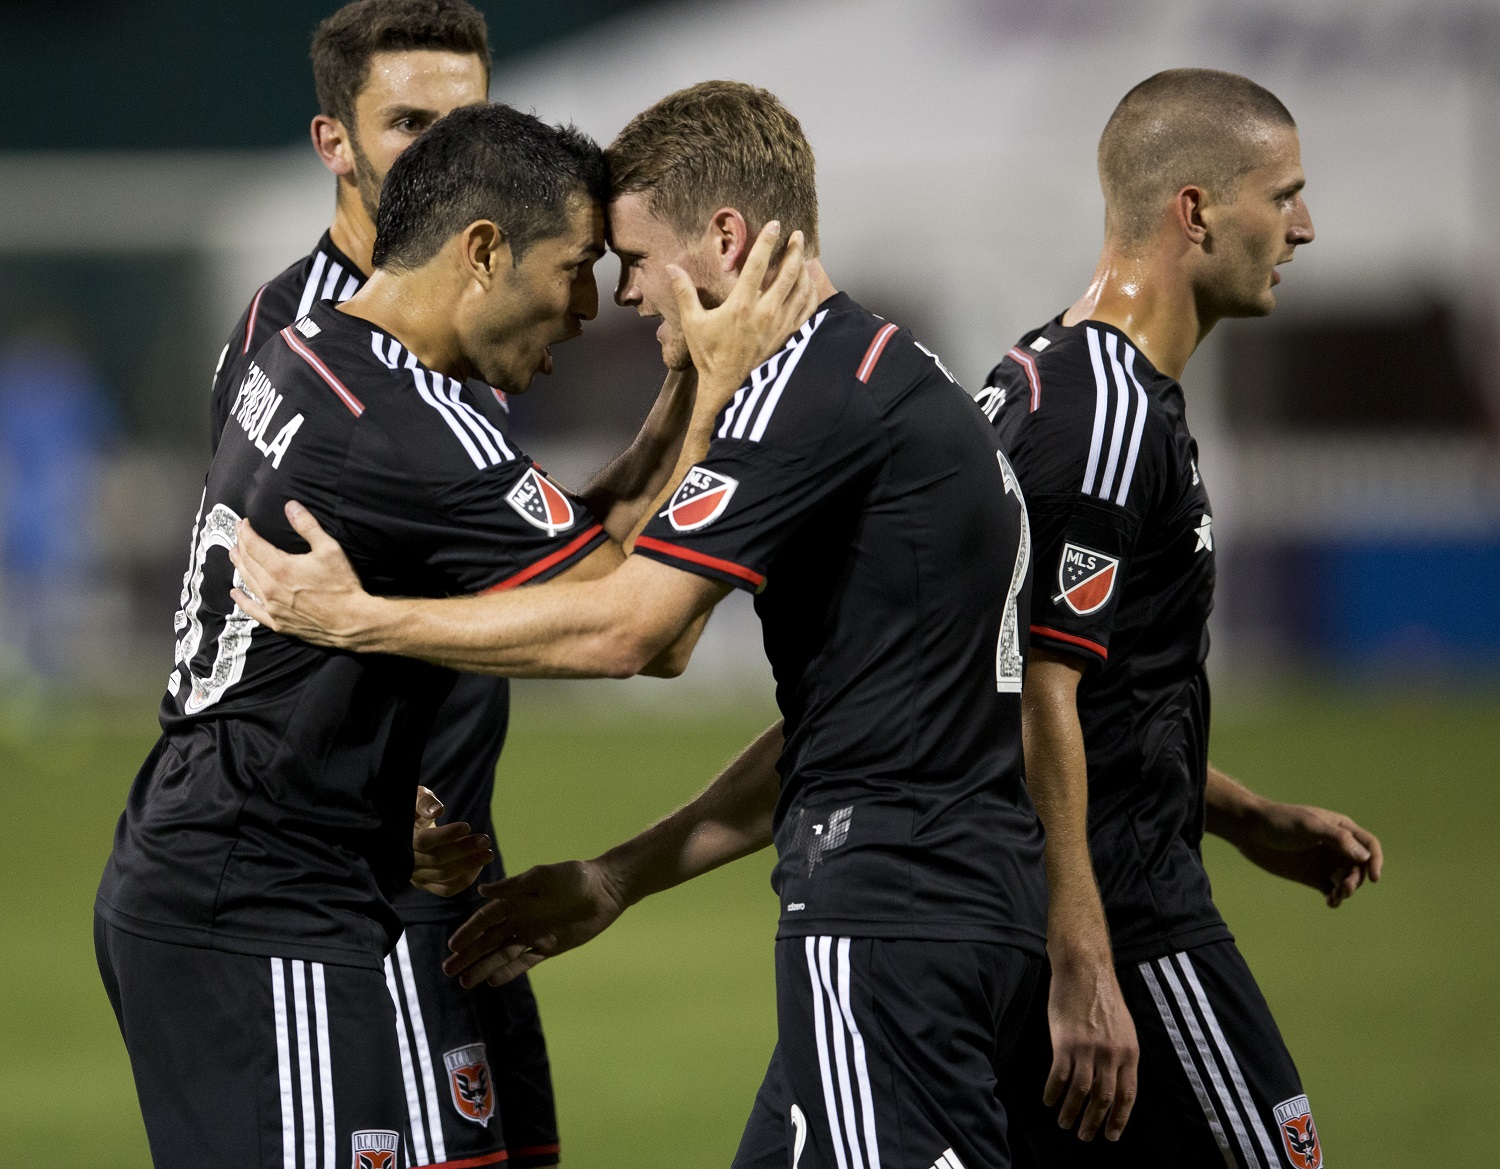 D.C. United forward Fabian Espindola (10) and teammate defender Taylor Kemp (2) celebrate after teammate Perry Kitchen, right, scored during the second half of an MLS soccer match against the Real Salt Lake in Washington, Saturday, Aug. 1, 2015. D.C. United won 6-4.    (AP Photo/Manuel Balce Ceneta)